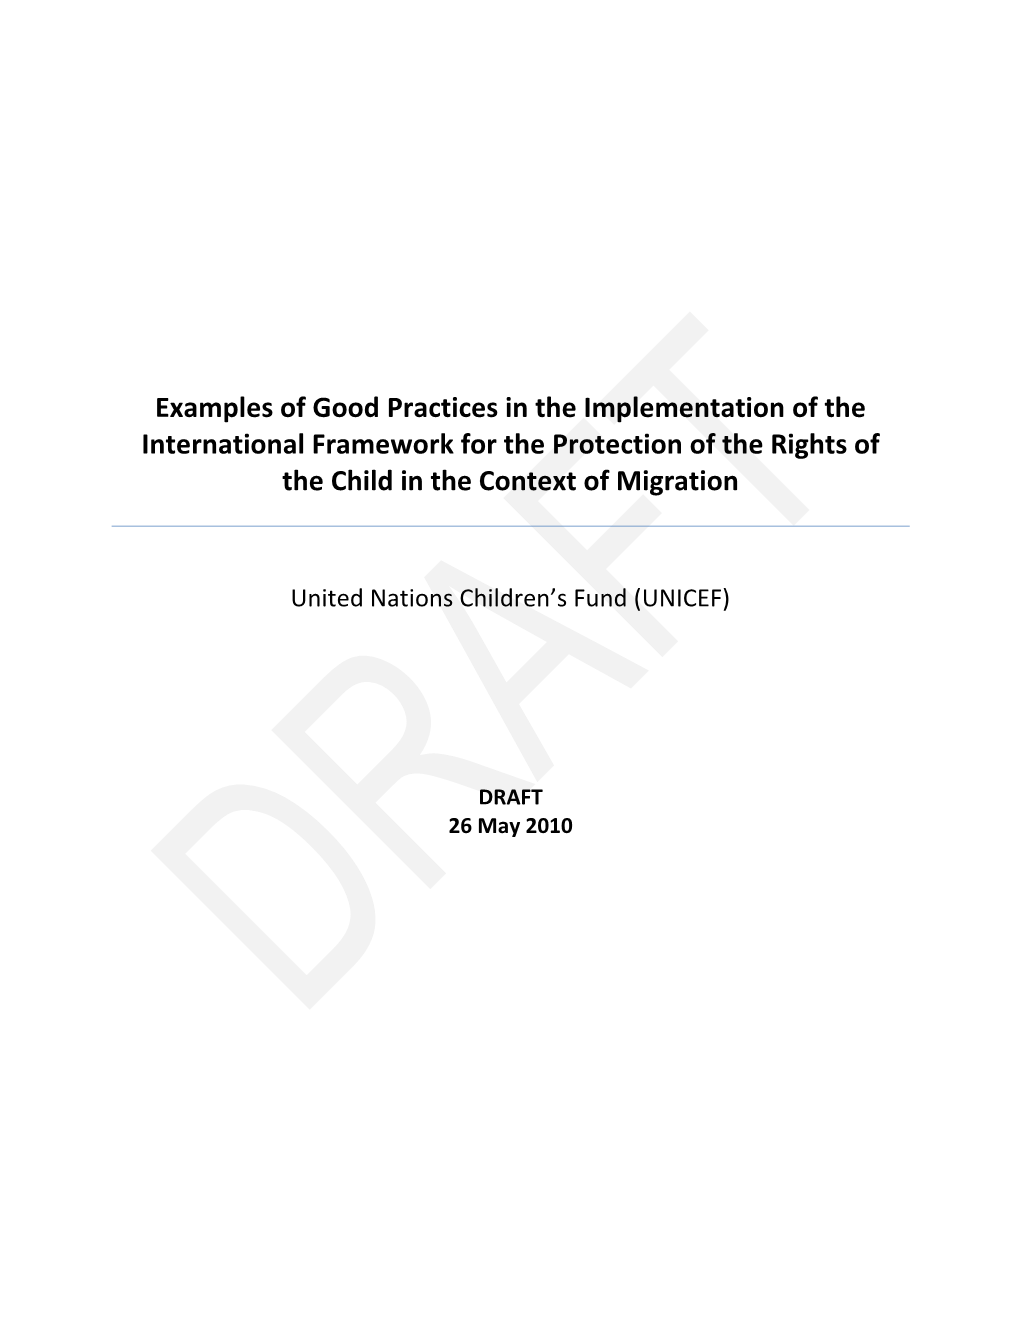 Examples of Good Practices in the Implementation of the International Framework for the Protection of the Rights of the Child in the Context of Migration